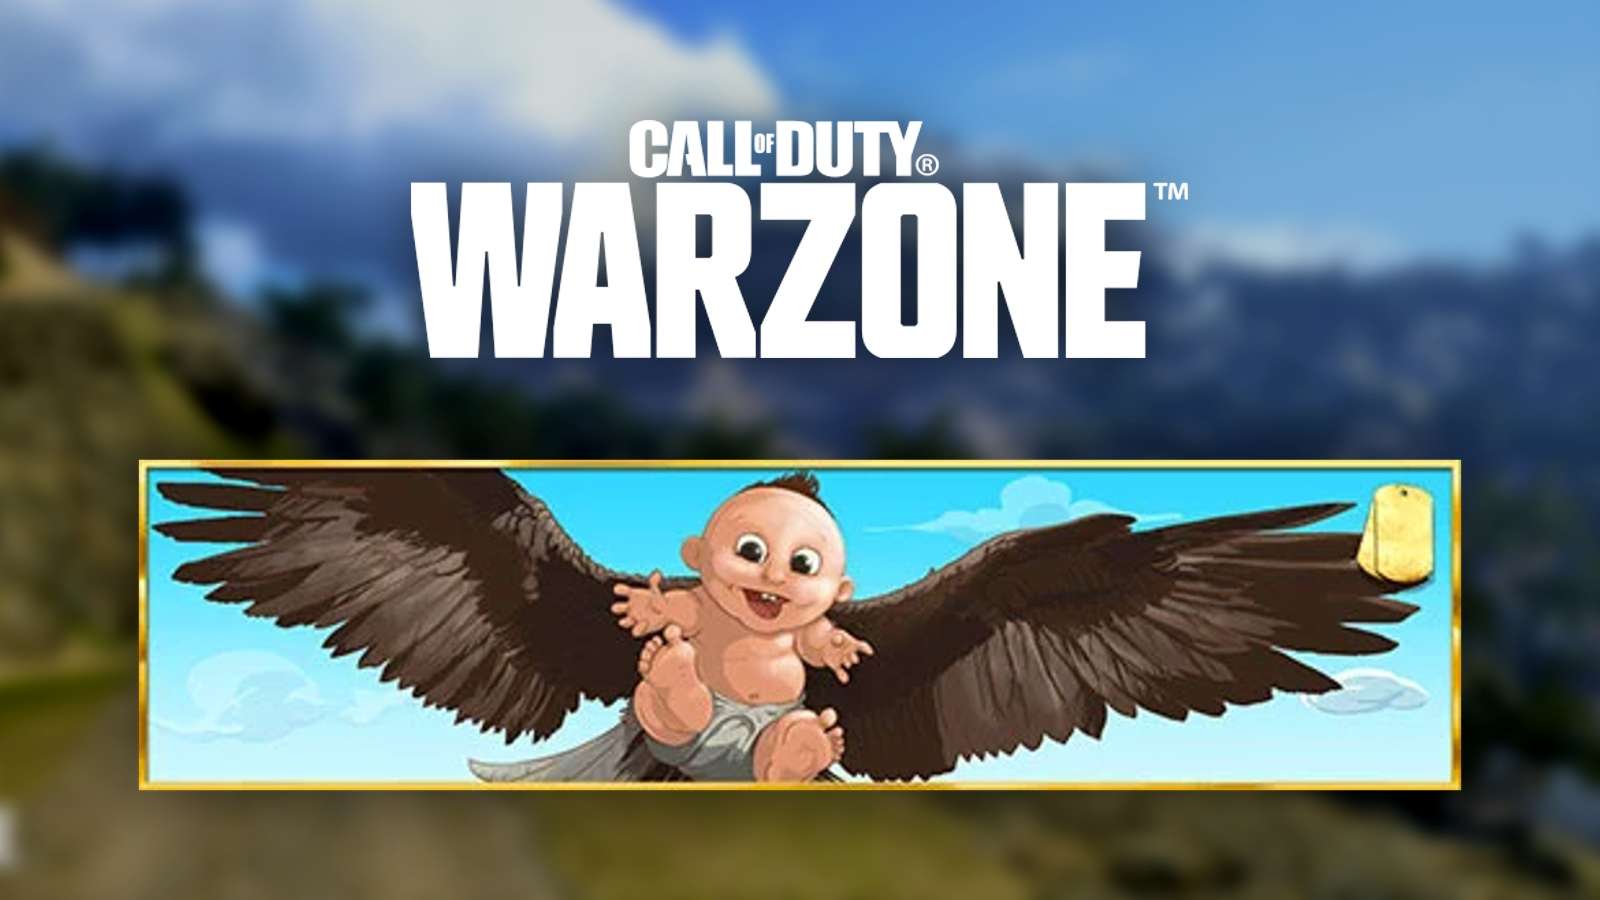 Warzone eagle child calling card with warzone logo